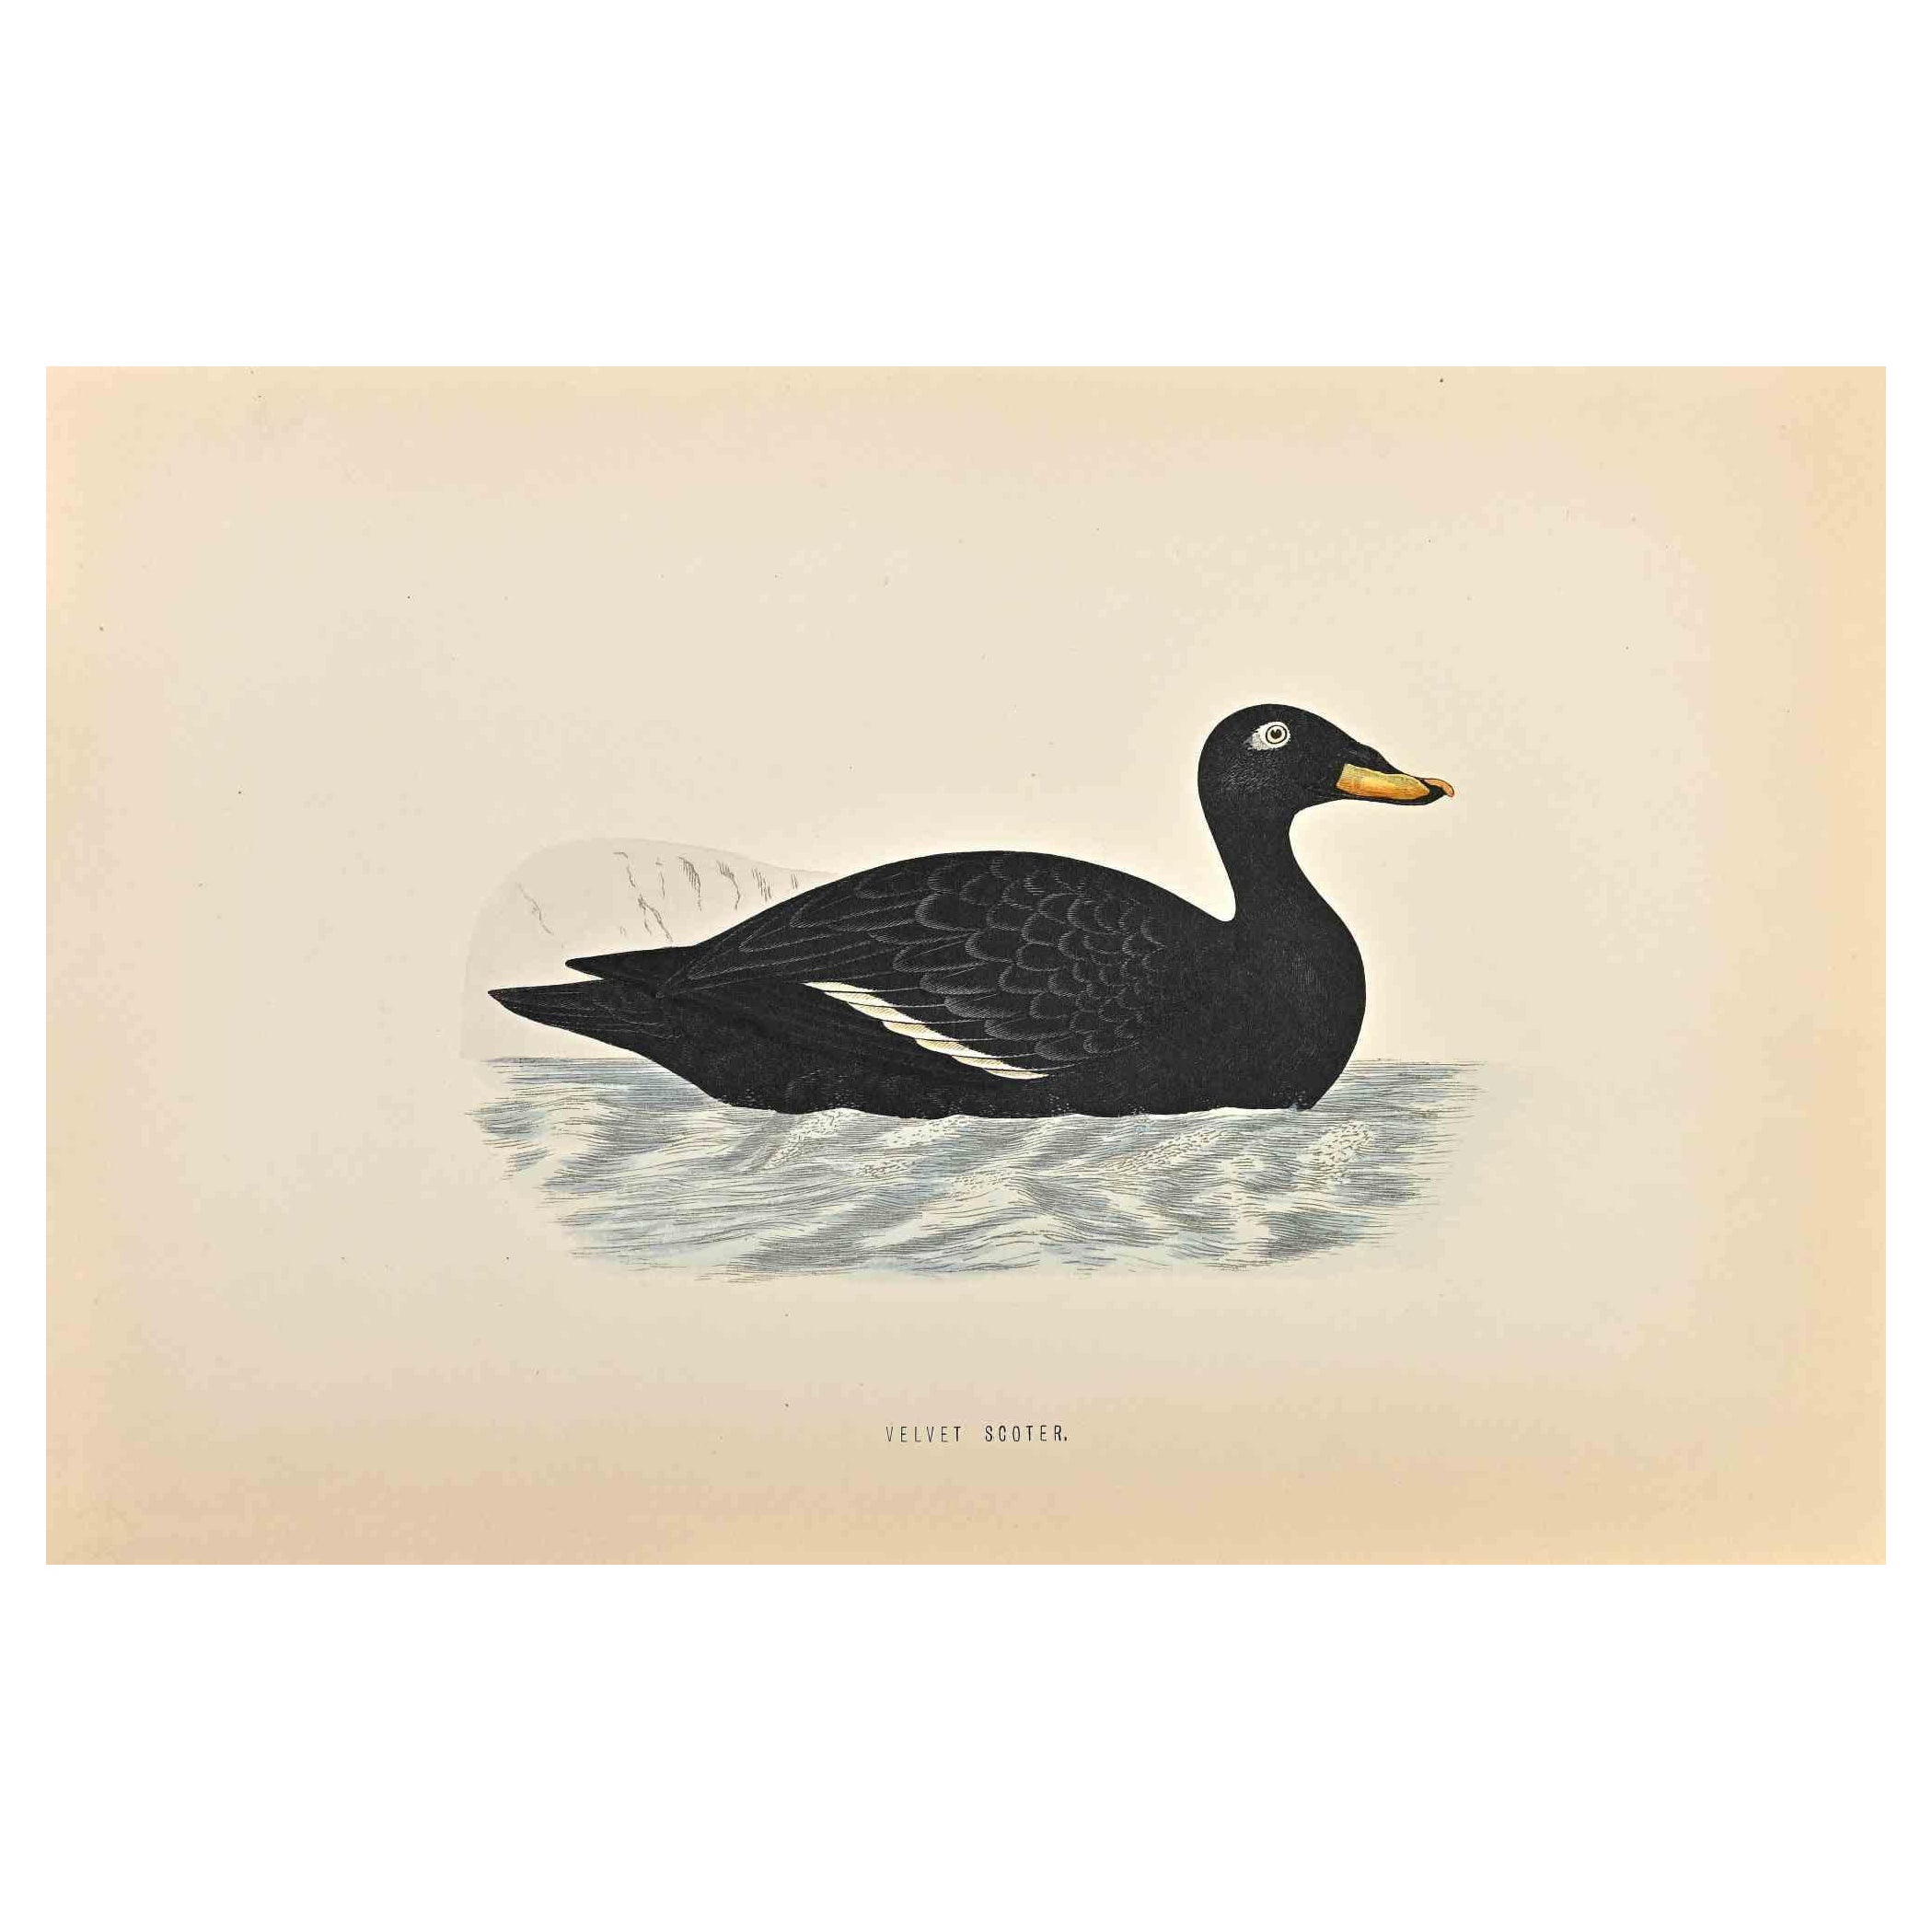 Velvet Scoter is a modern artwork realized in 1870 by the British artist Alexander Francis Lydon (1836-1917).

Woodcut print on ivory-colored paper.

Hand-colored, published by London, Bell & Sons, 1870.  

The name of the bird is printed on the